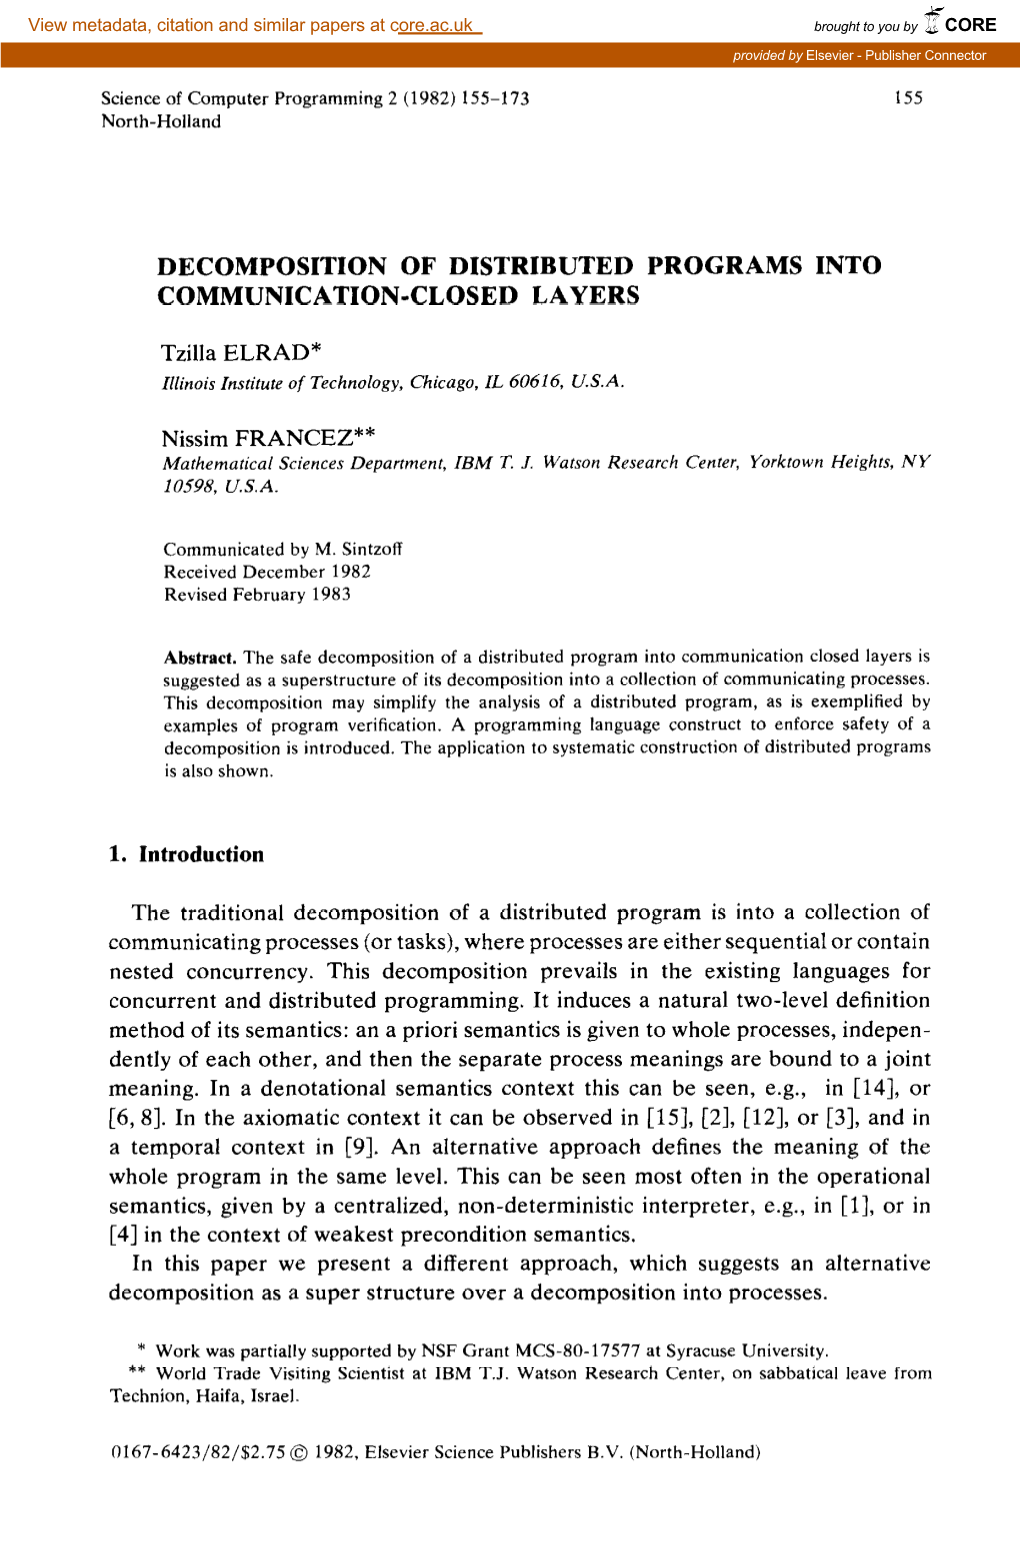 Decomposition of Distributed Programs Into Communication-Closed Layers